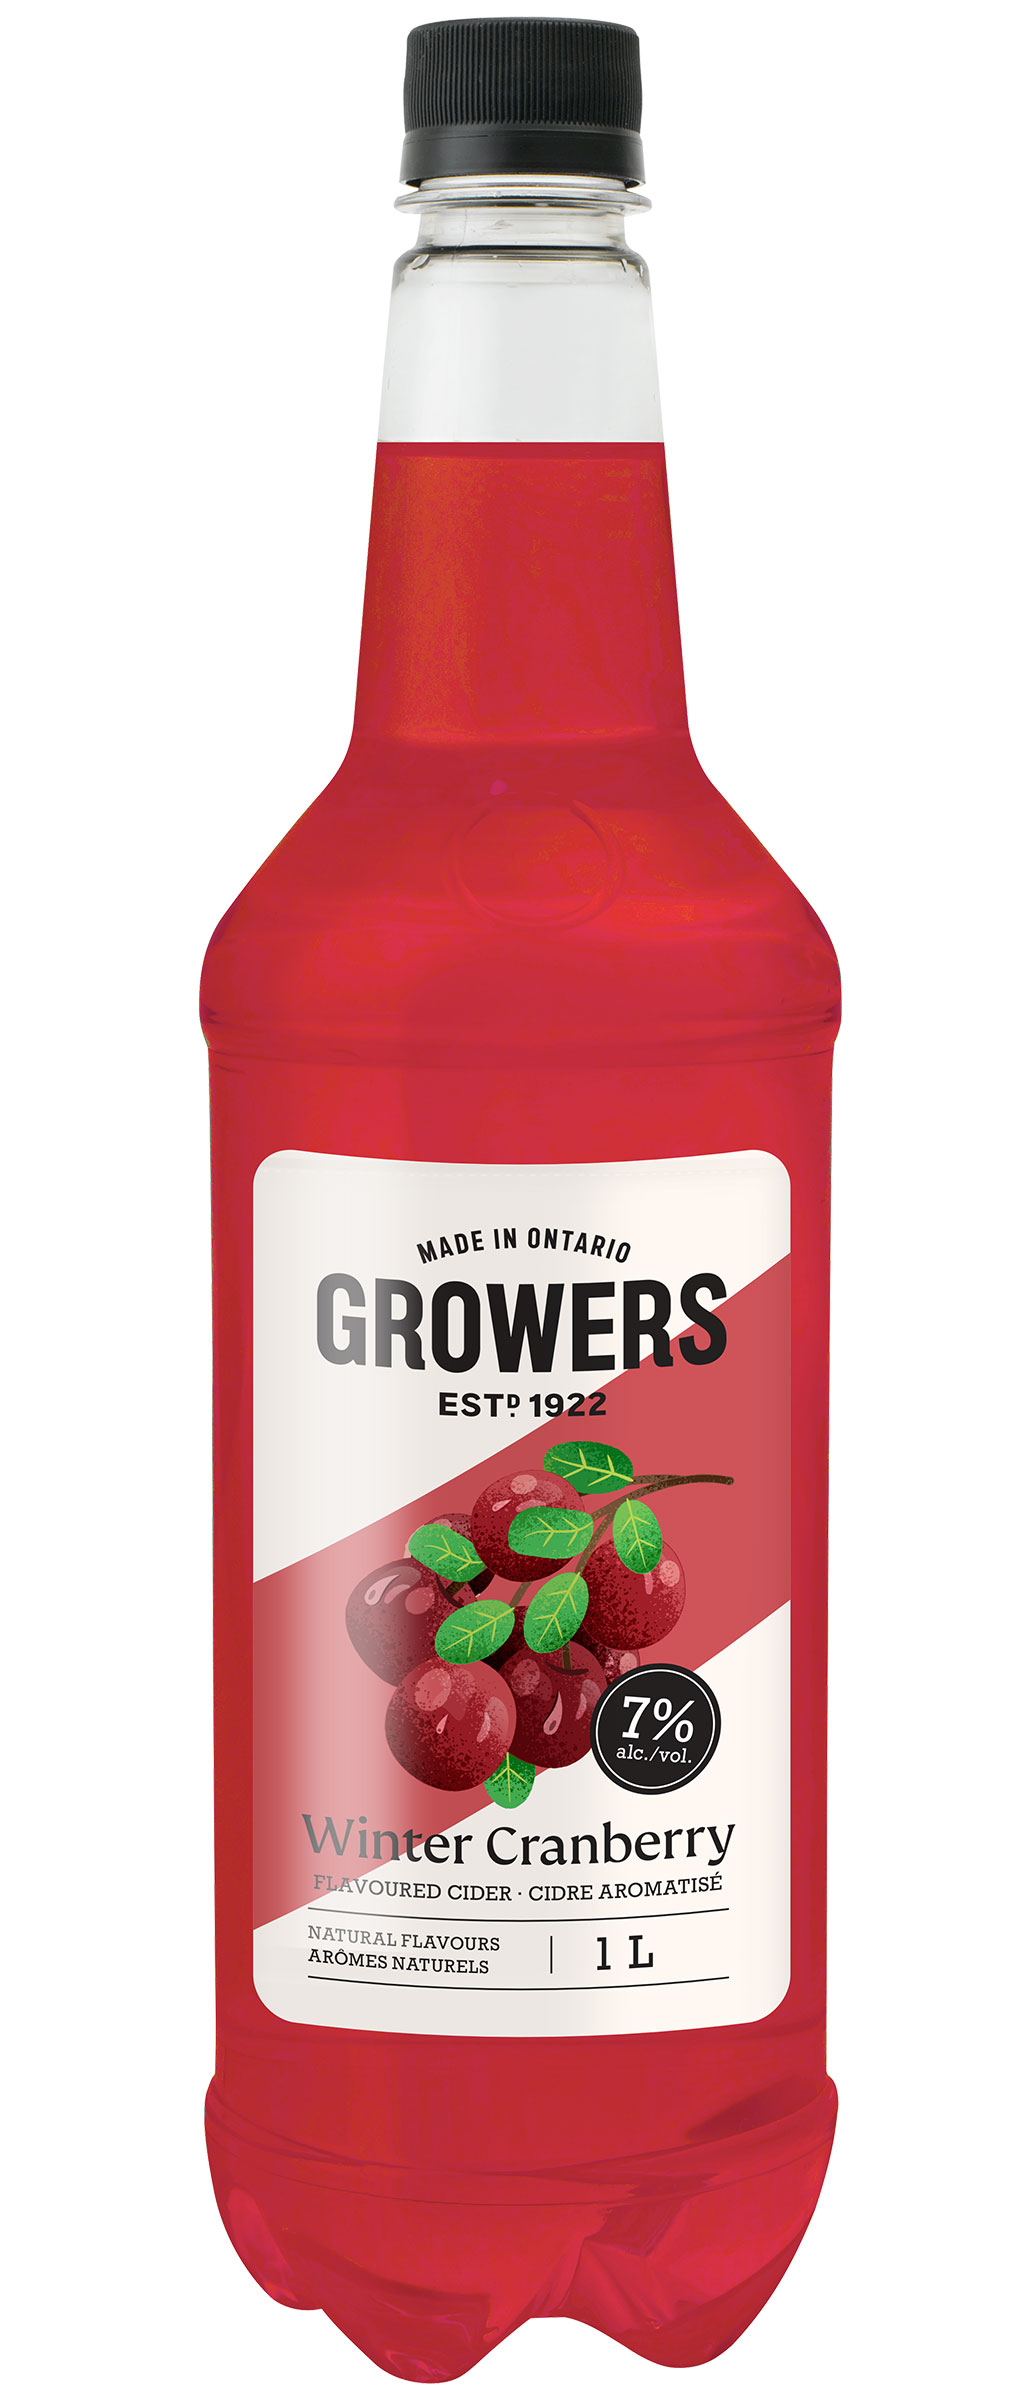 Bottle of Winter Cranberry Growers cider